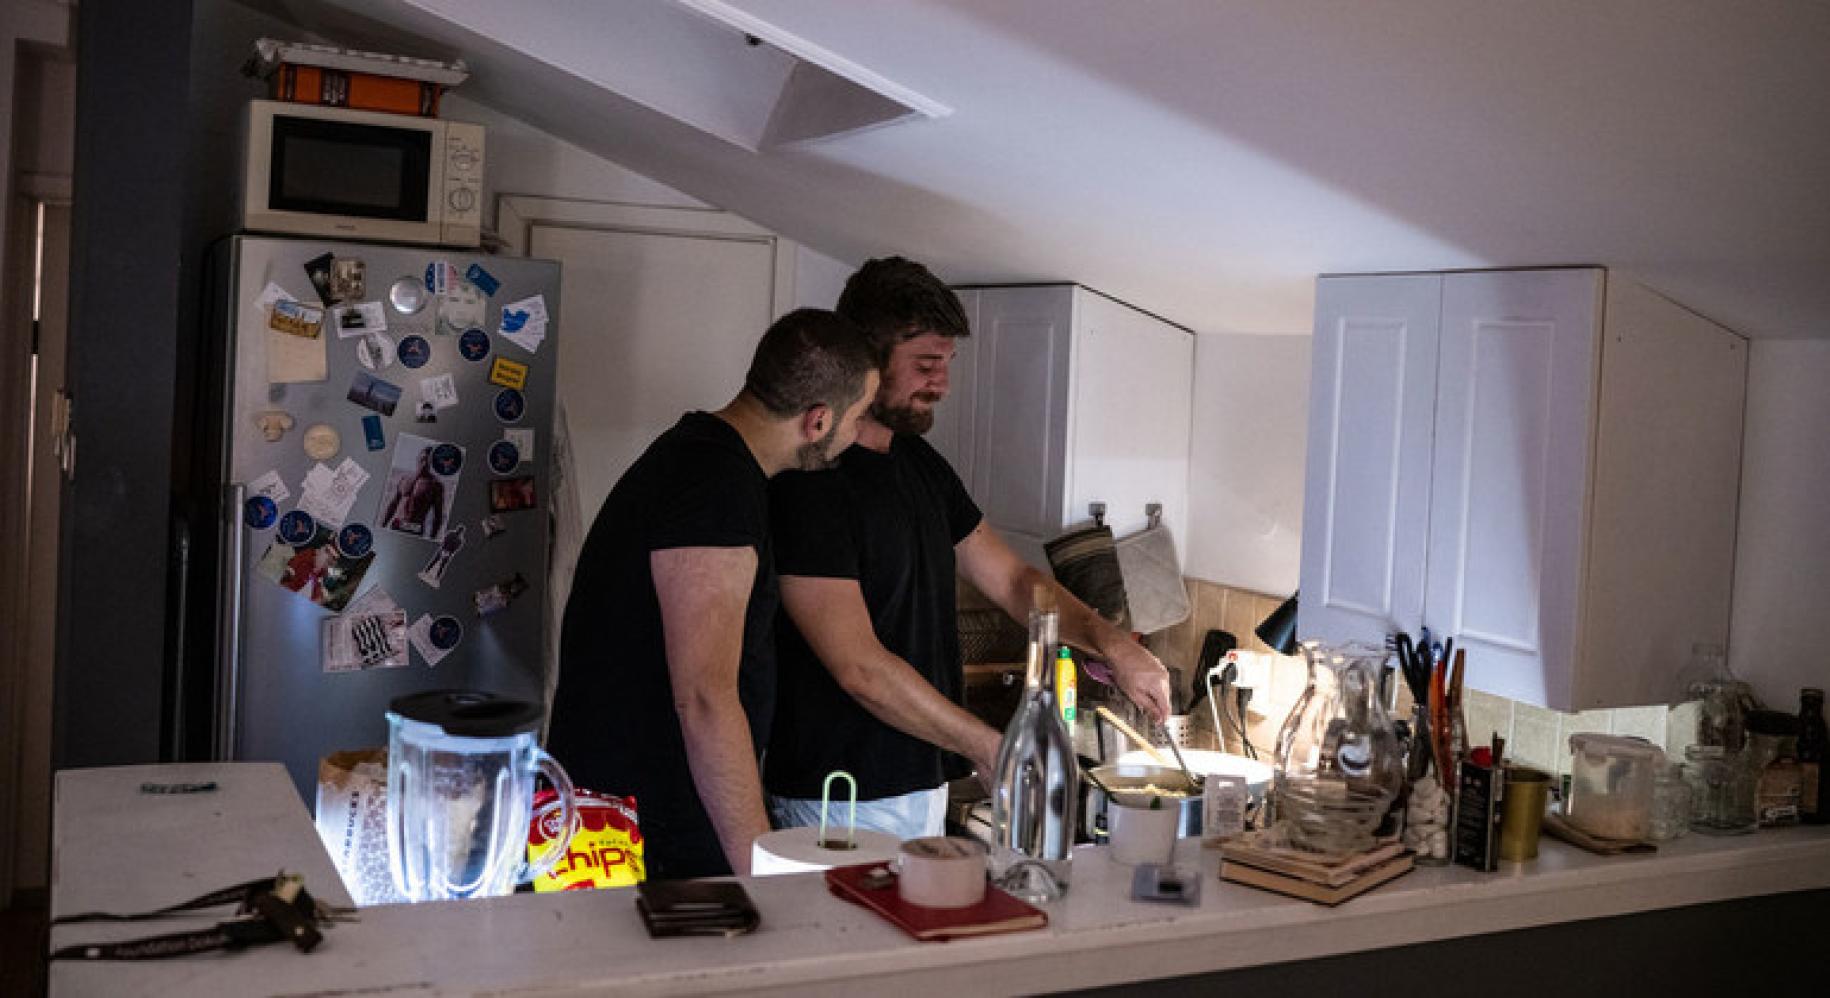 Two men are pictured in their kitchen preparing a meal together